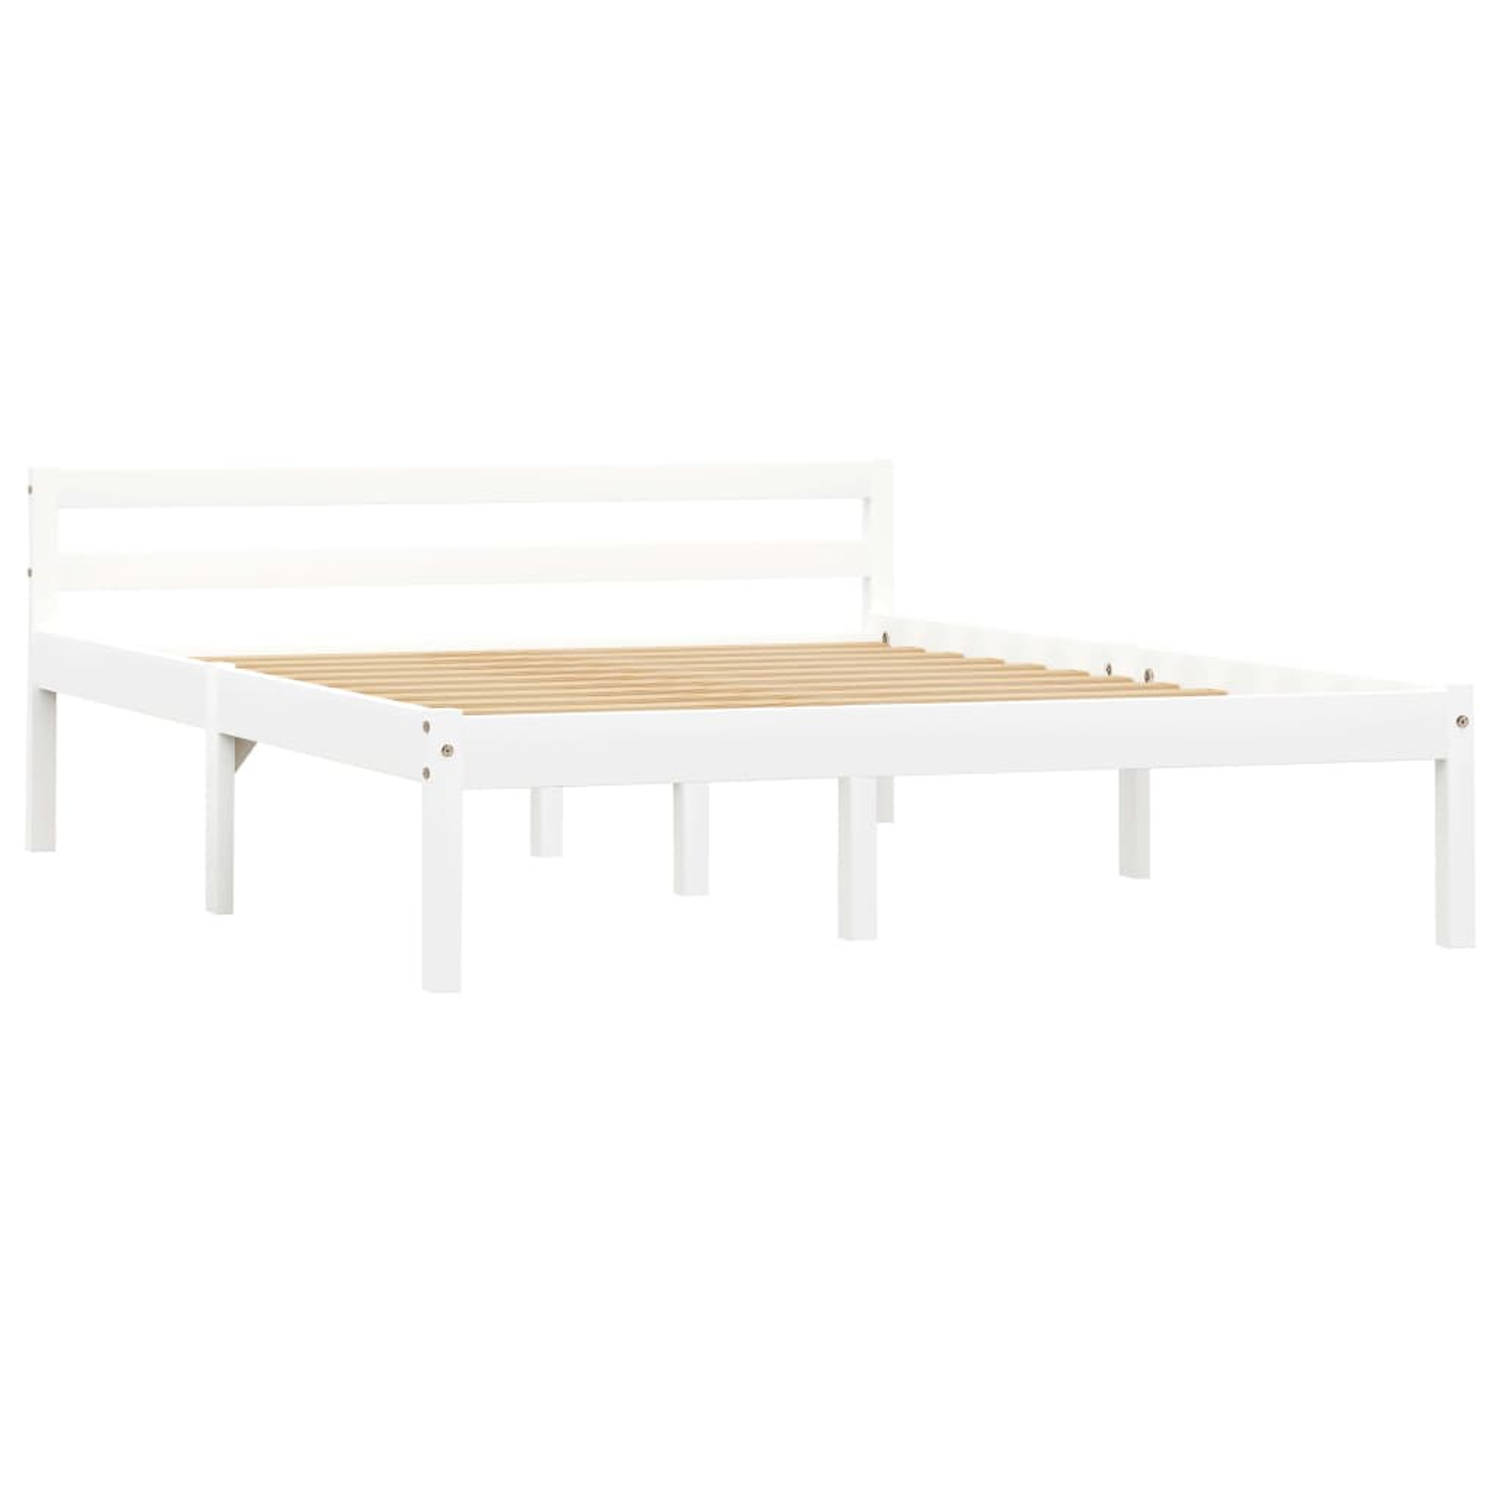 The Living Store Bedframe massief grenenhout wit 120x200 cm - Bed